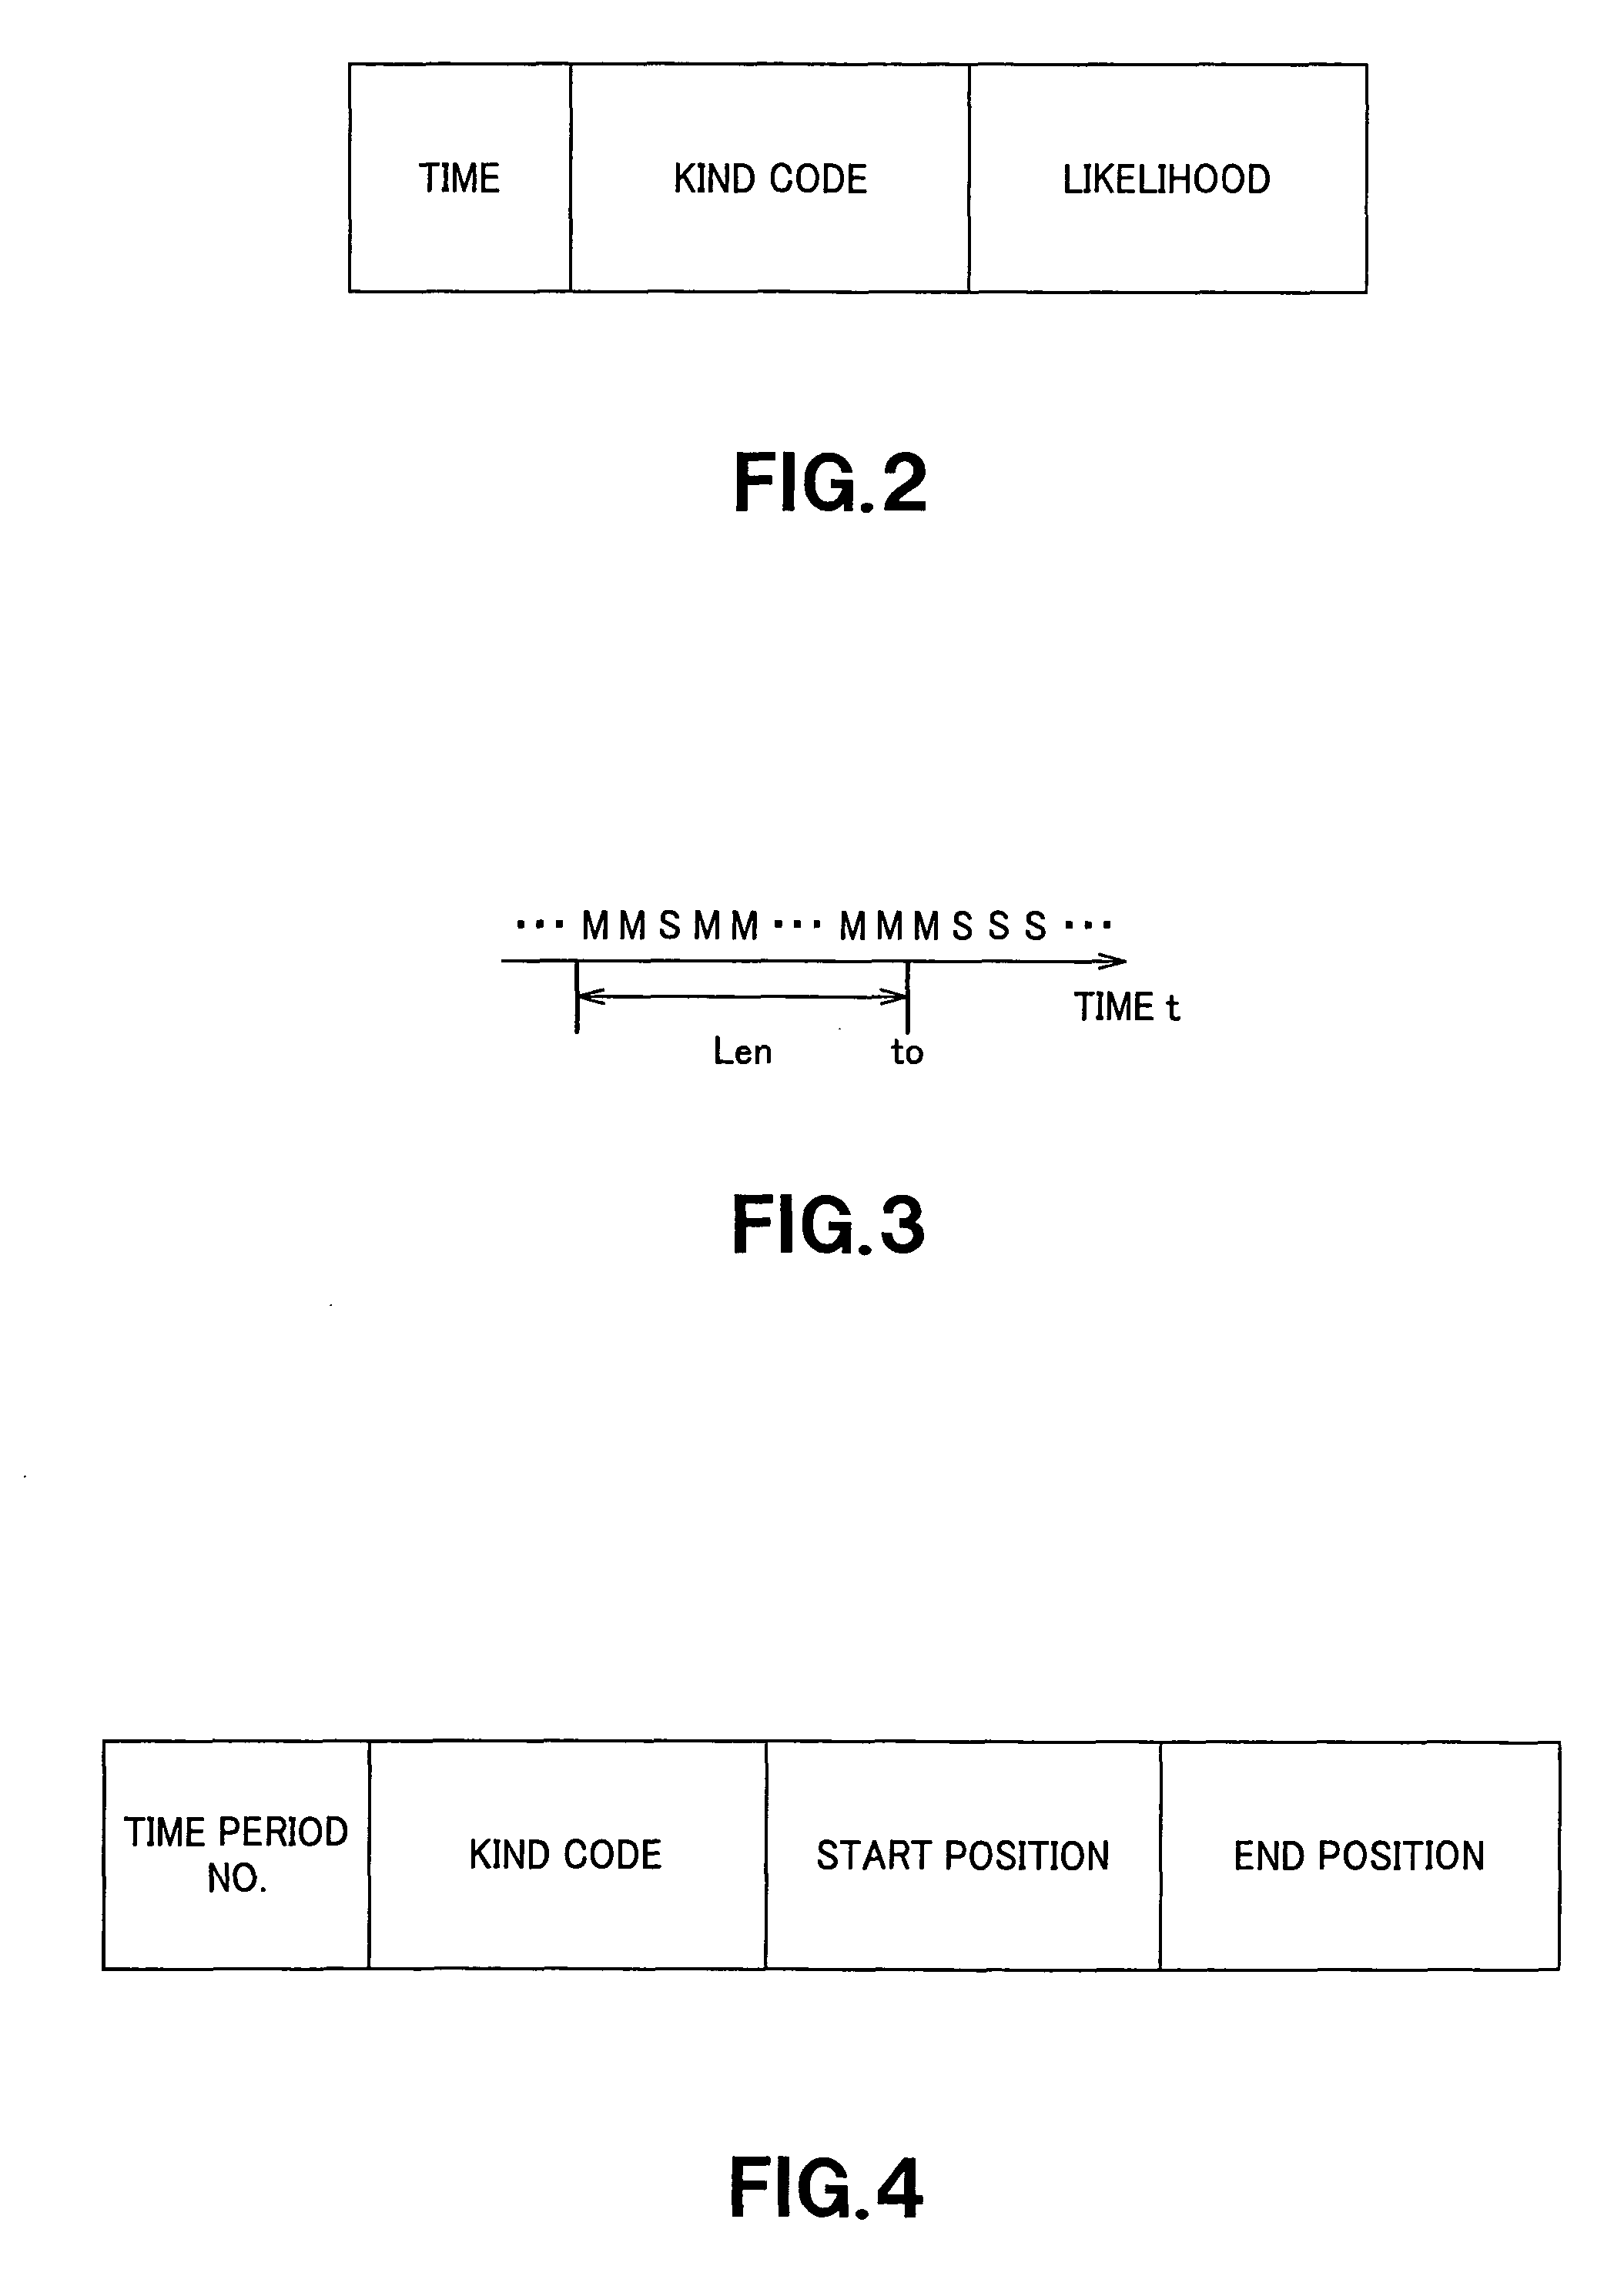 Apparatus and method for detecting speech and music portions of an audio signal